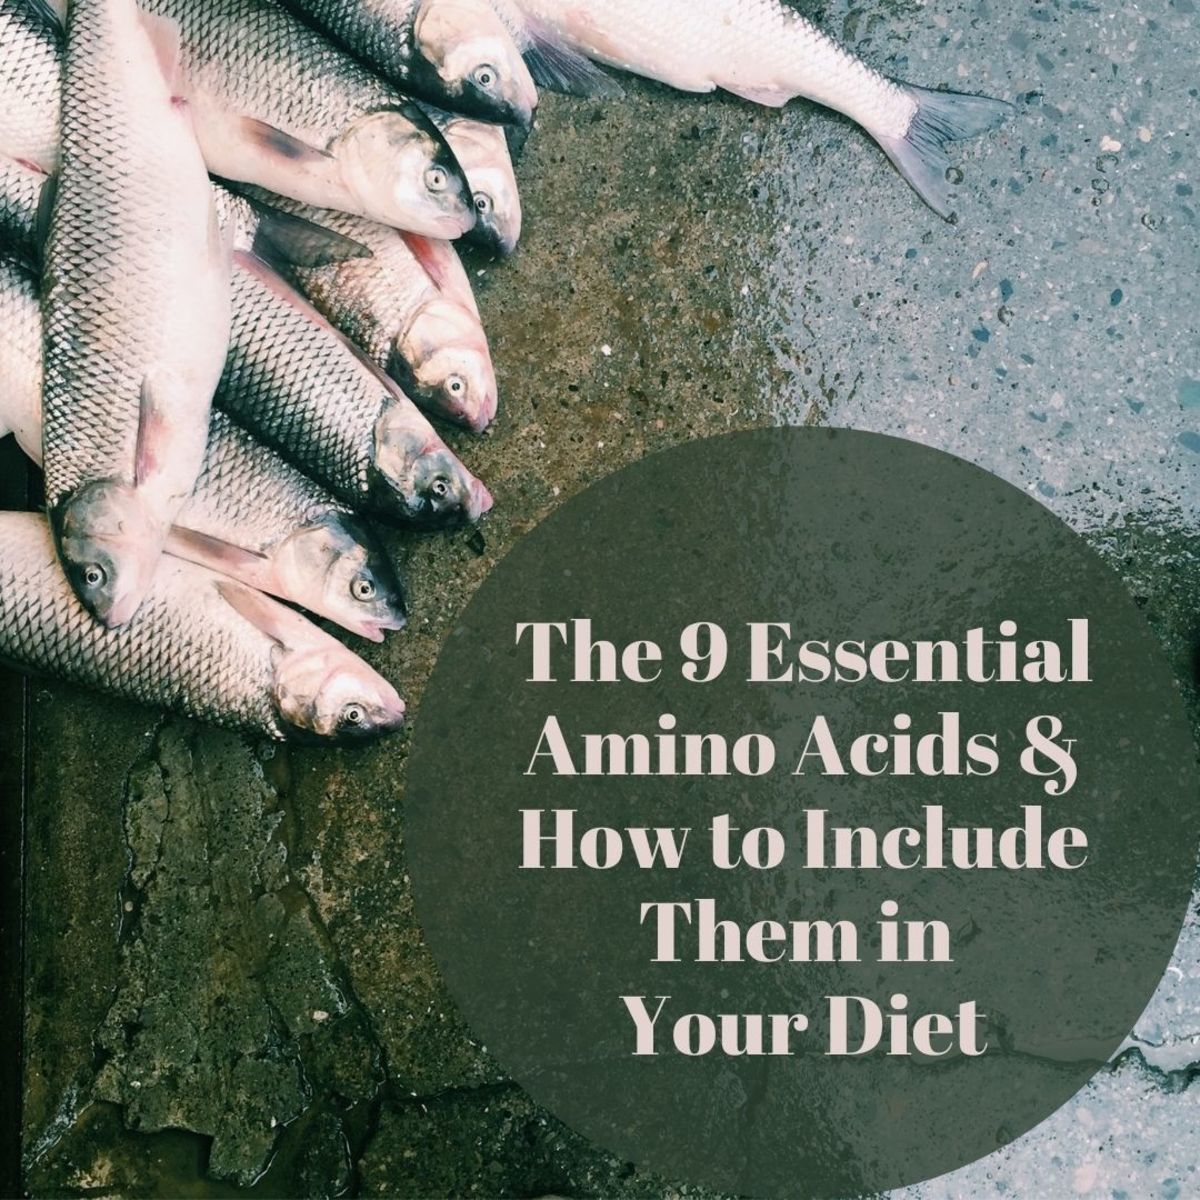 Read more about the 9 essential amino acids and how to incorporate them into your diet.